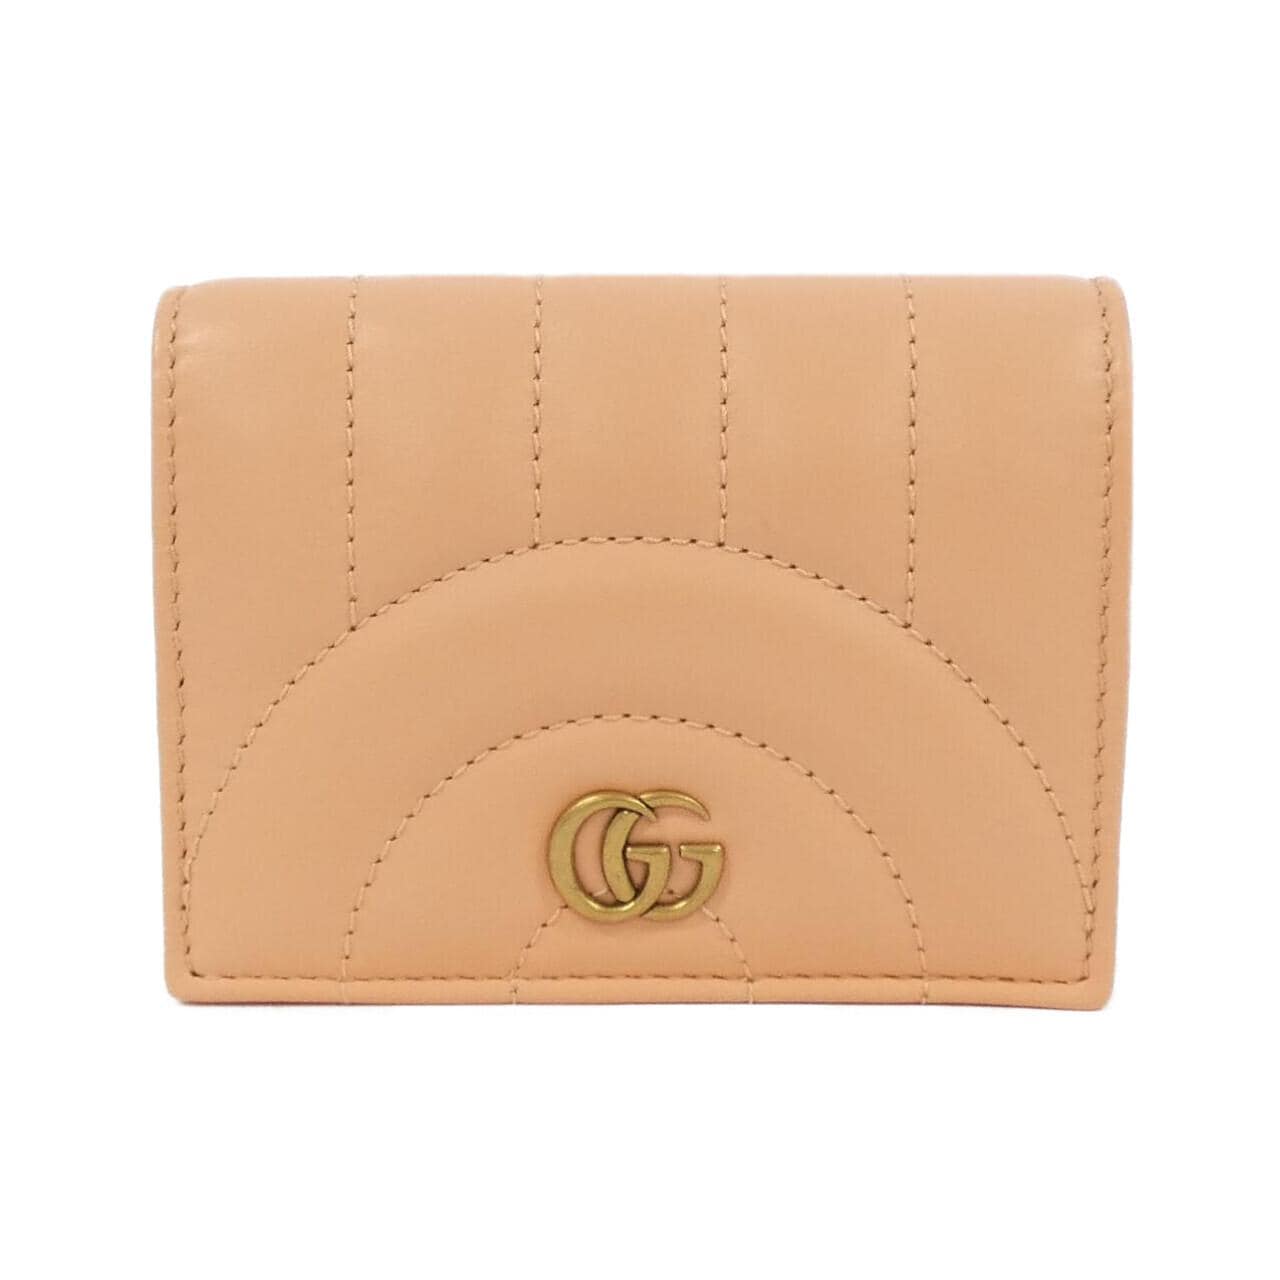 [BRAND NEW] Gucci GG MARMONT 466492 AABZN Wallet